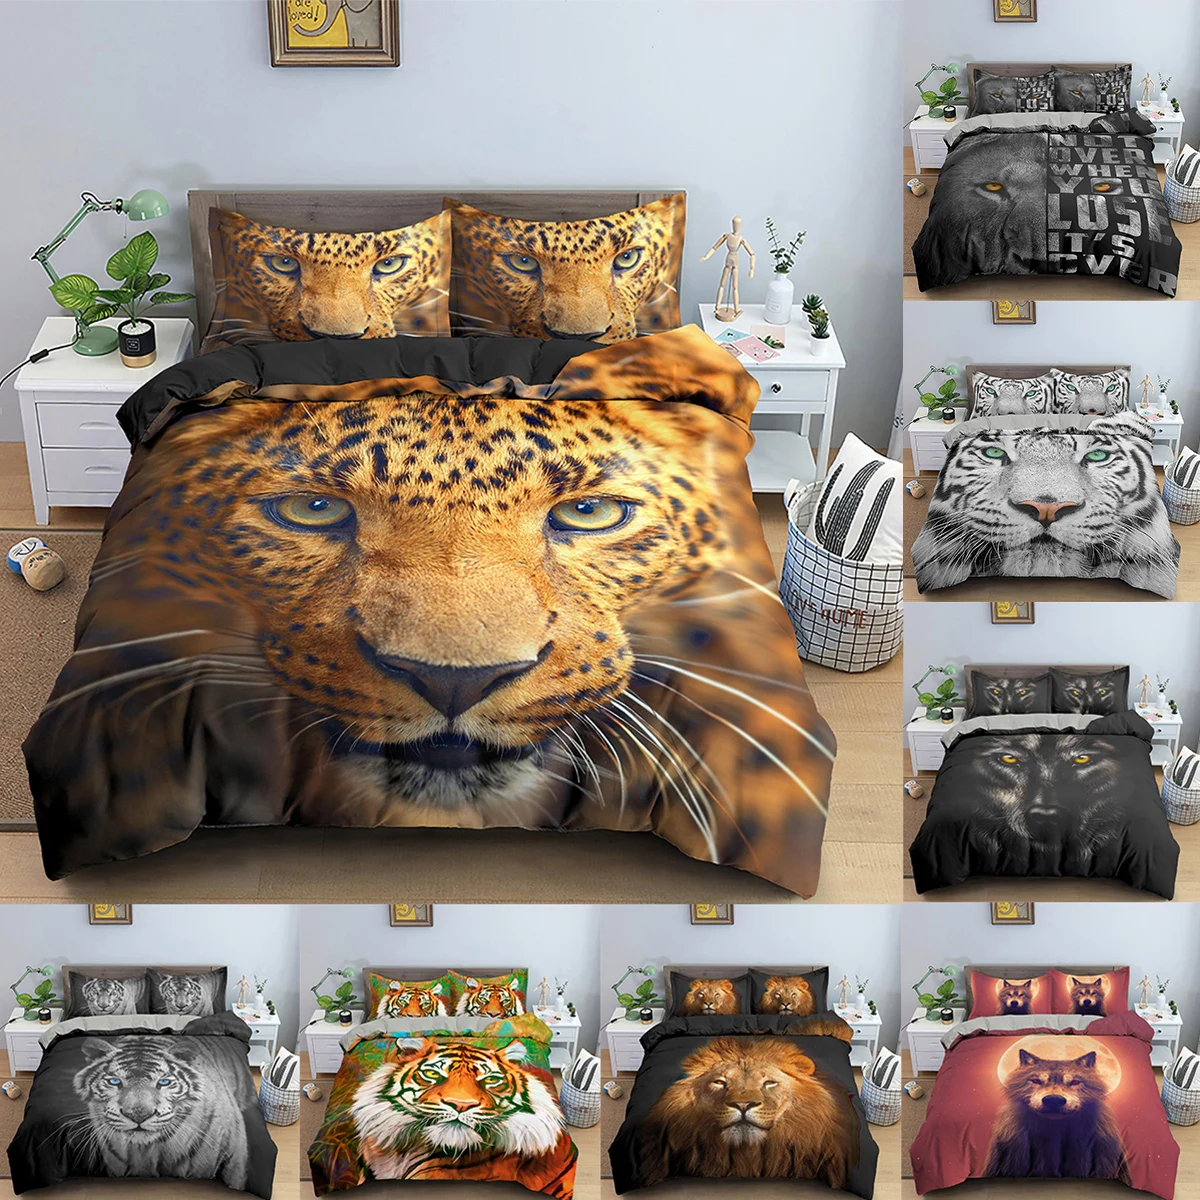 Tiger Bedding Set Leopard Printed Duvet Cover Queen King Size Quilt Cover With Pillowcase Soft Duvet Cover With Zipper Closure